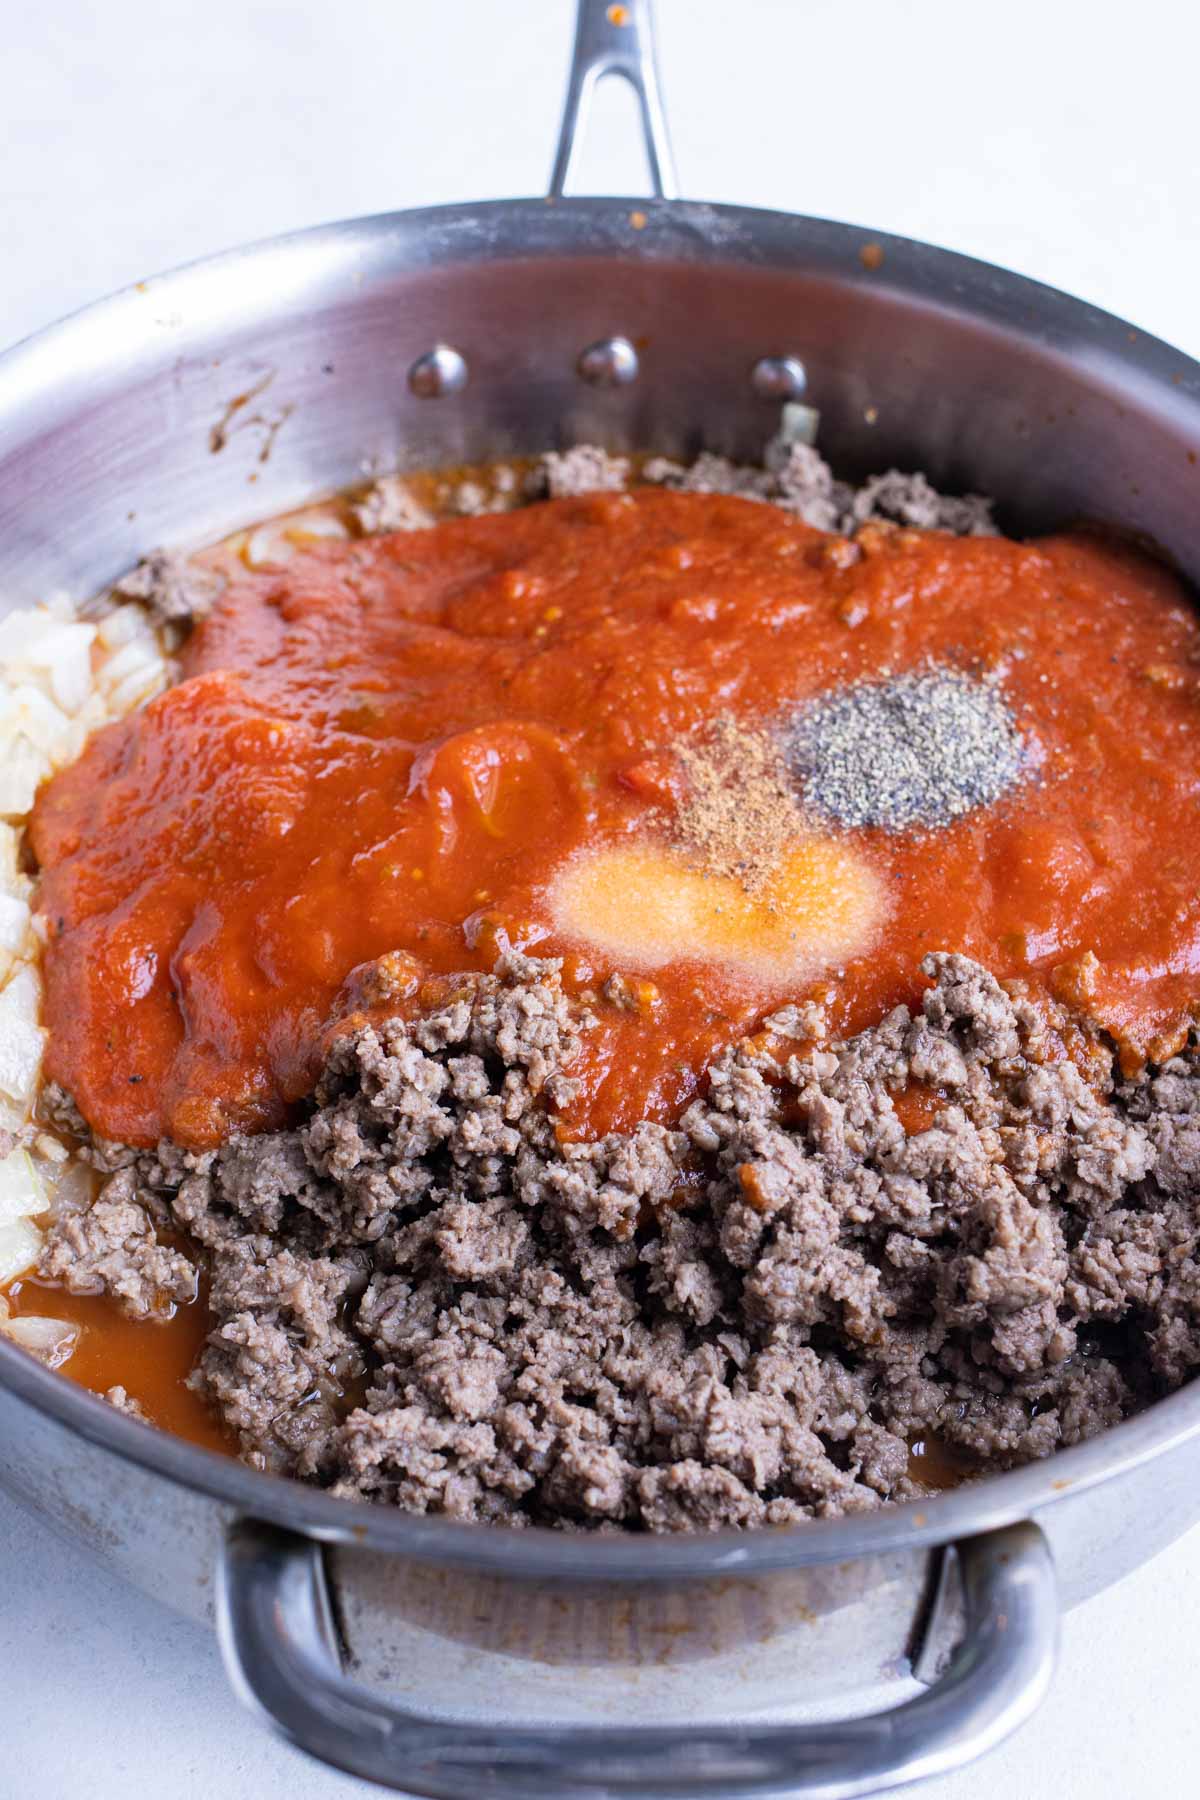 Tomato sauce is added to a skillet of cooked meat.